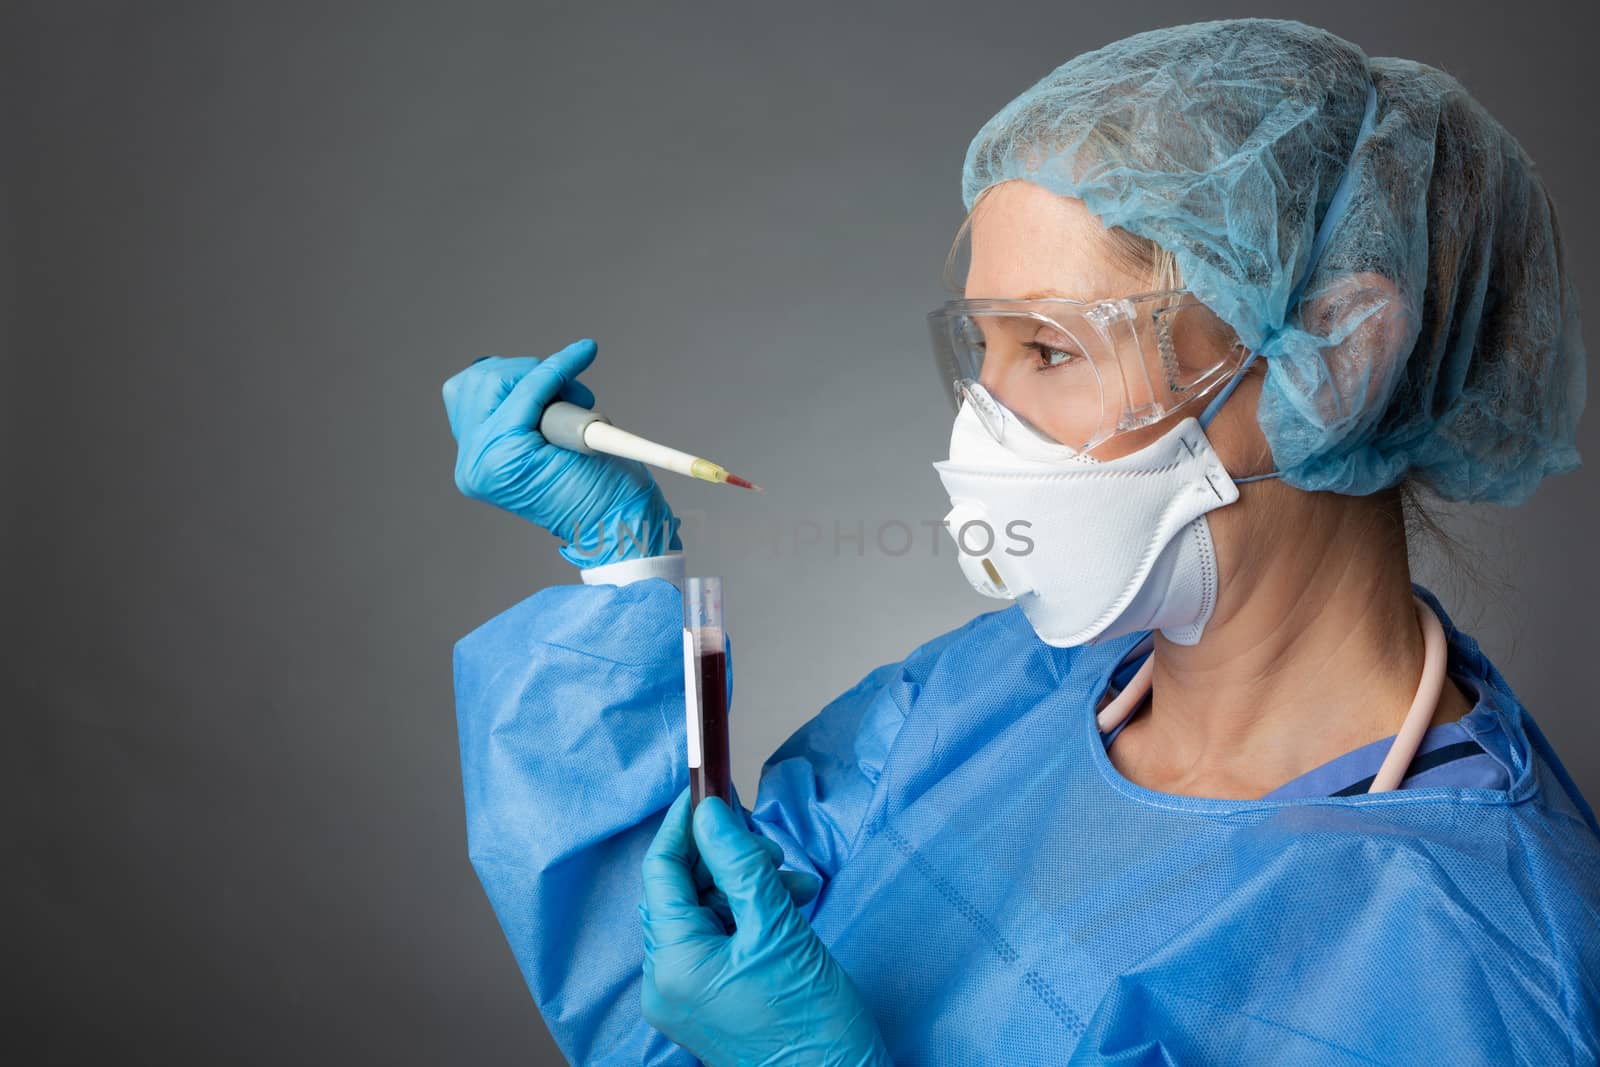 Laboratory pathologist healthcare worker holding a pipette blood sample for analysis.  She is wearing full protective PPE including gloves, apron, goggles, respirator mask